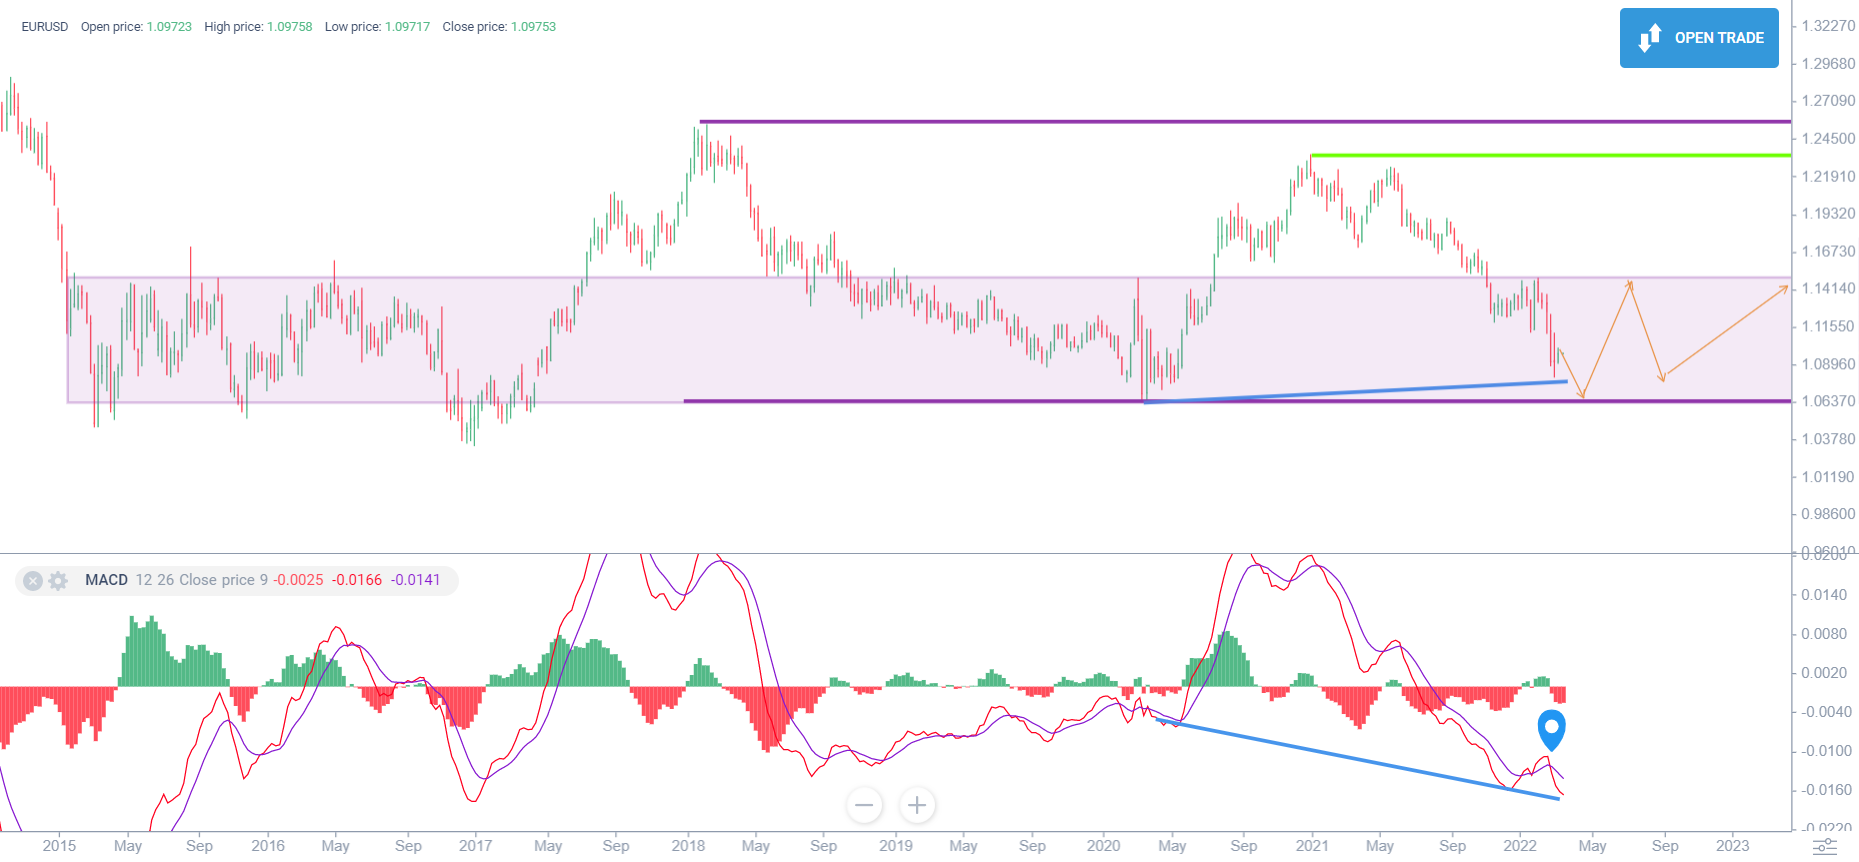 Euro to Dollar (EUR/USD) Forecast for 2021, 2022-2025 and Beyond |  LiteFinance (ex. LiteForex)